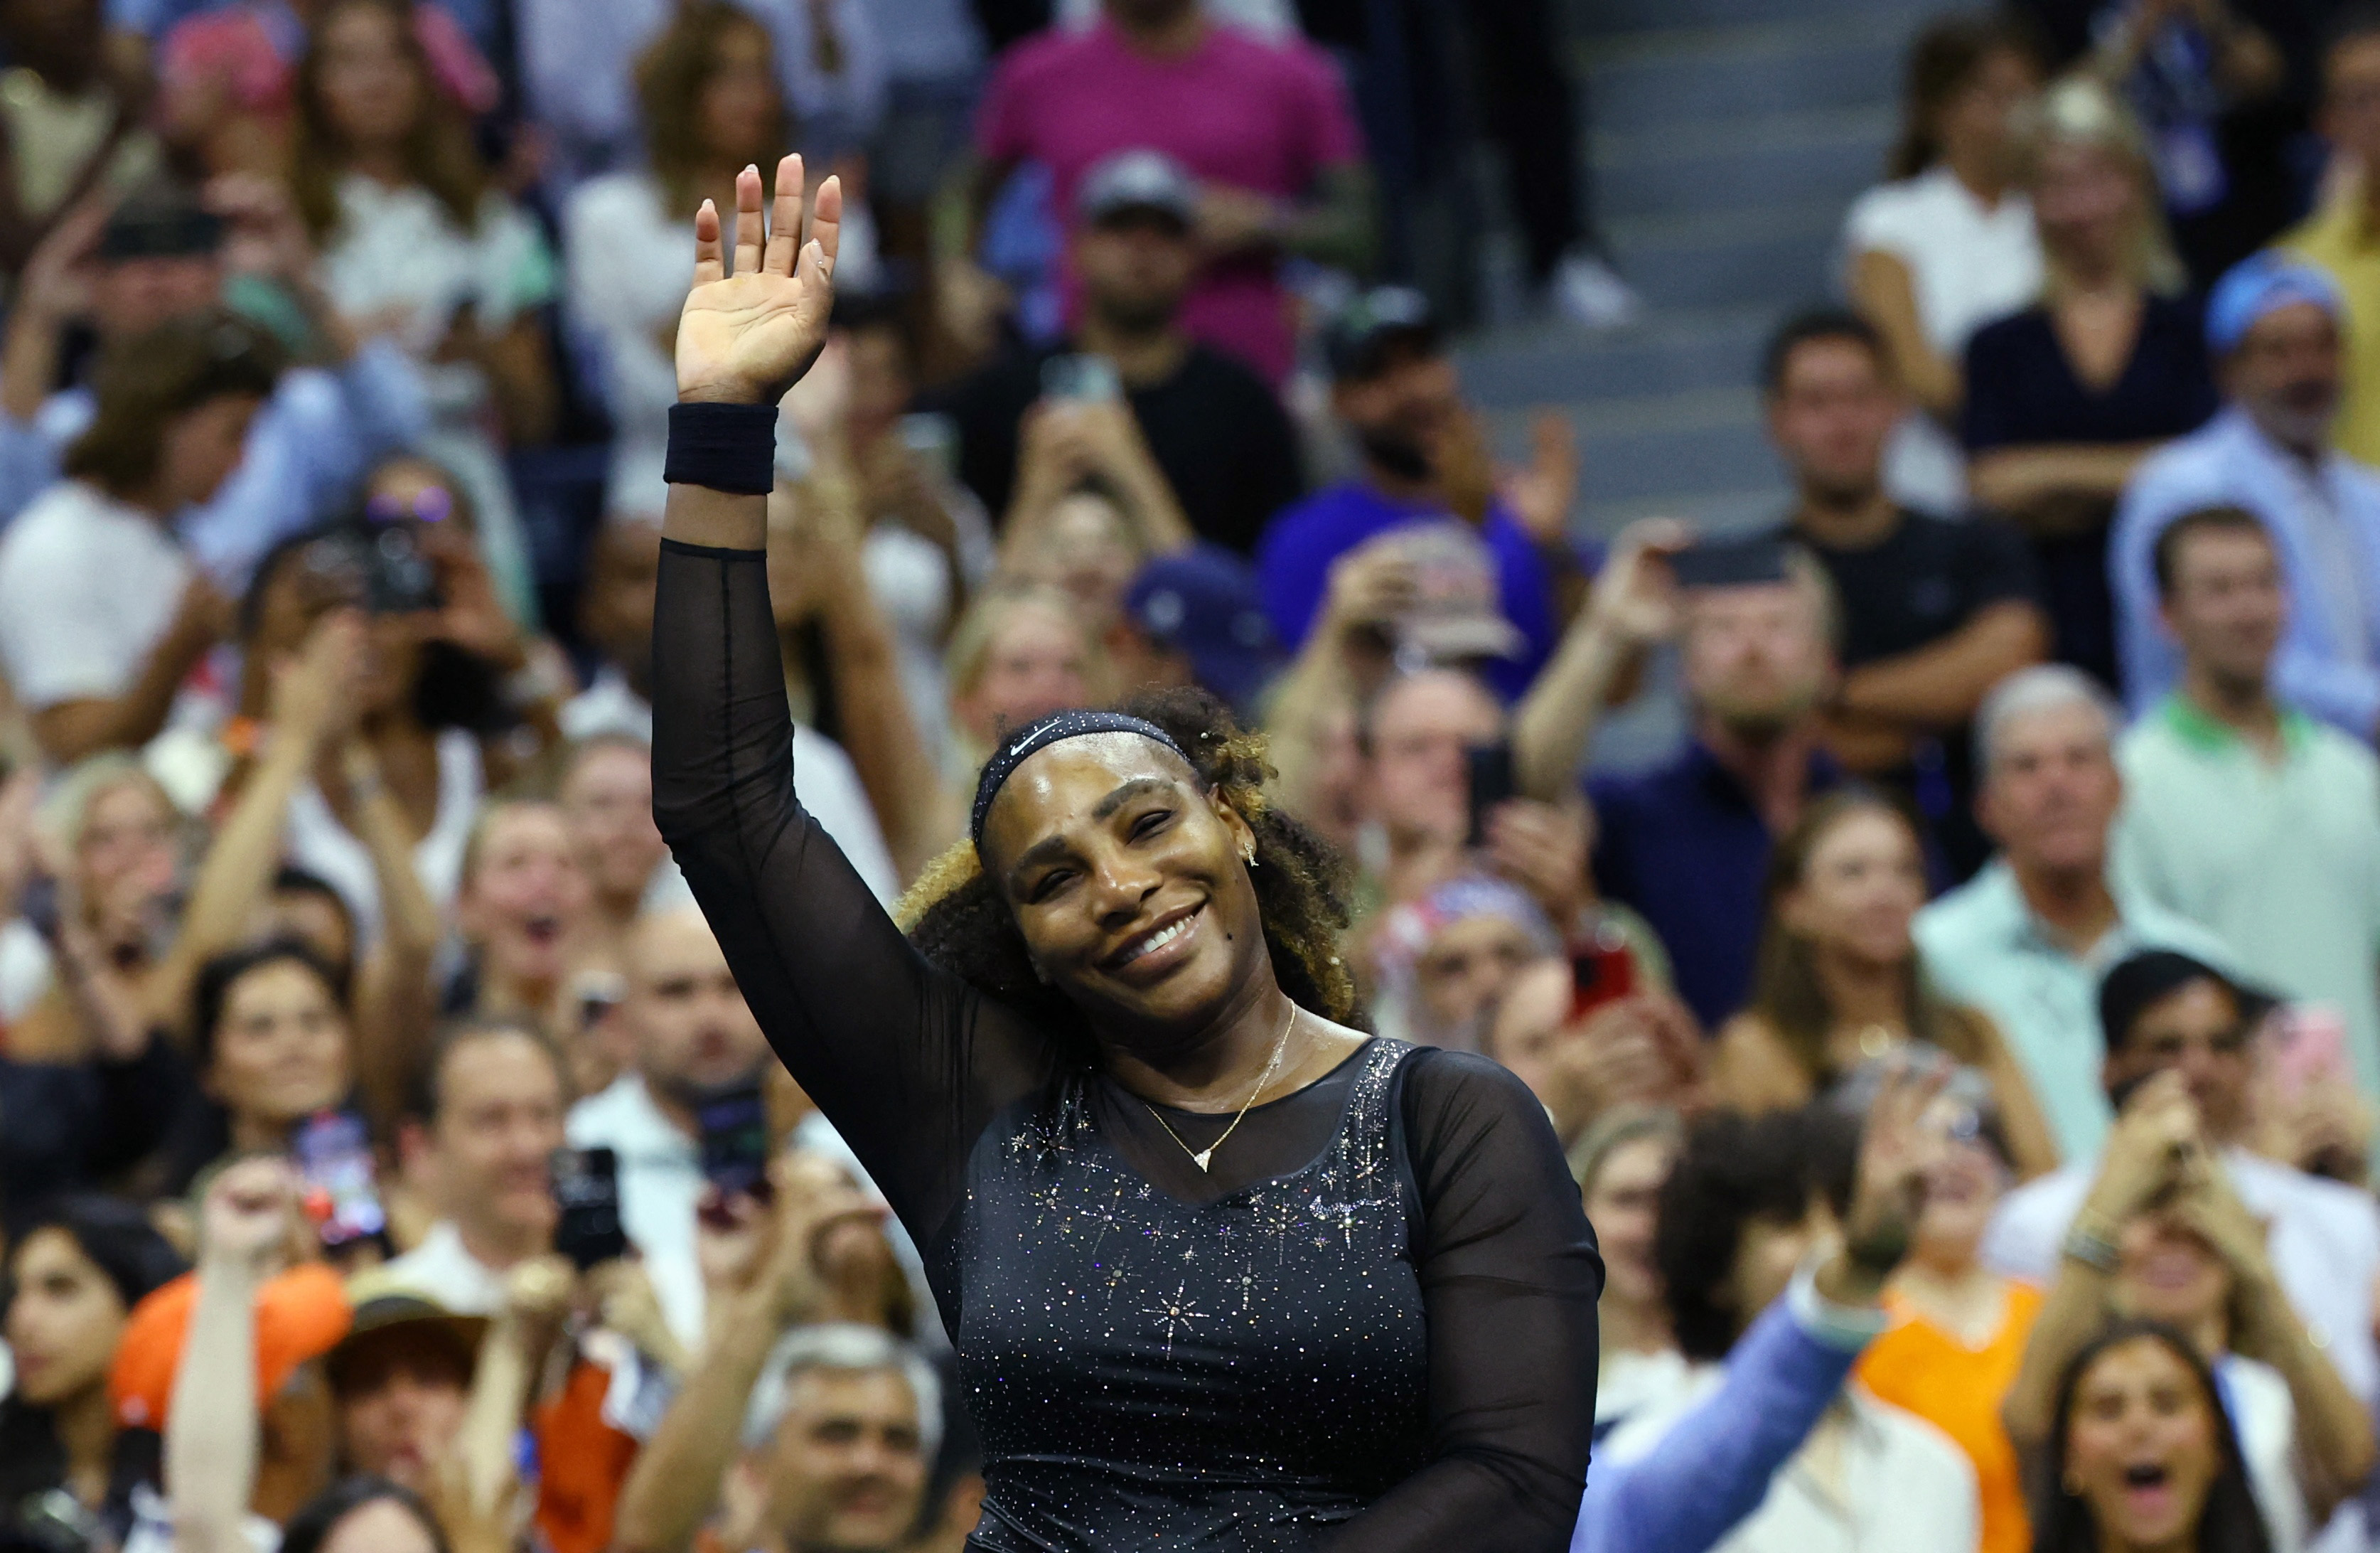 Serena Williams Retirement: Serena Williams still refuses to use 'retirement' word, but says she has 'no plans to return, atleast for now' - Check Out 